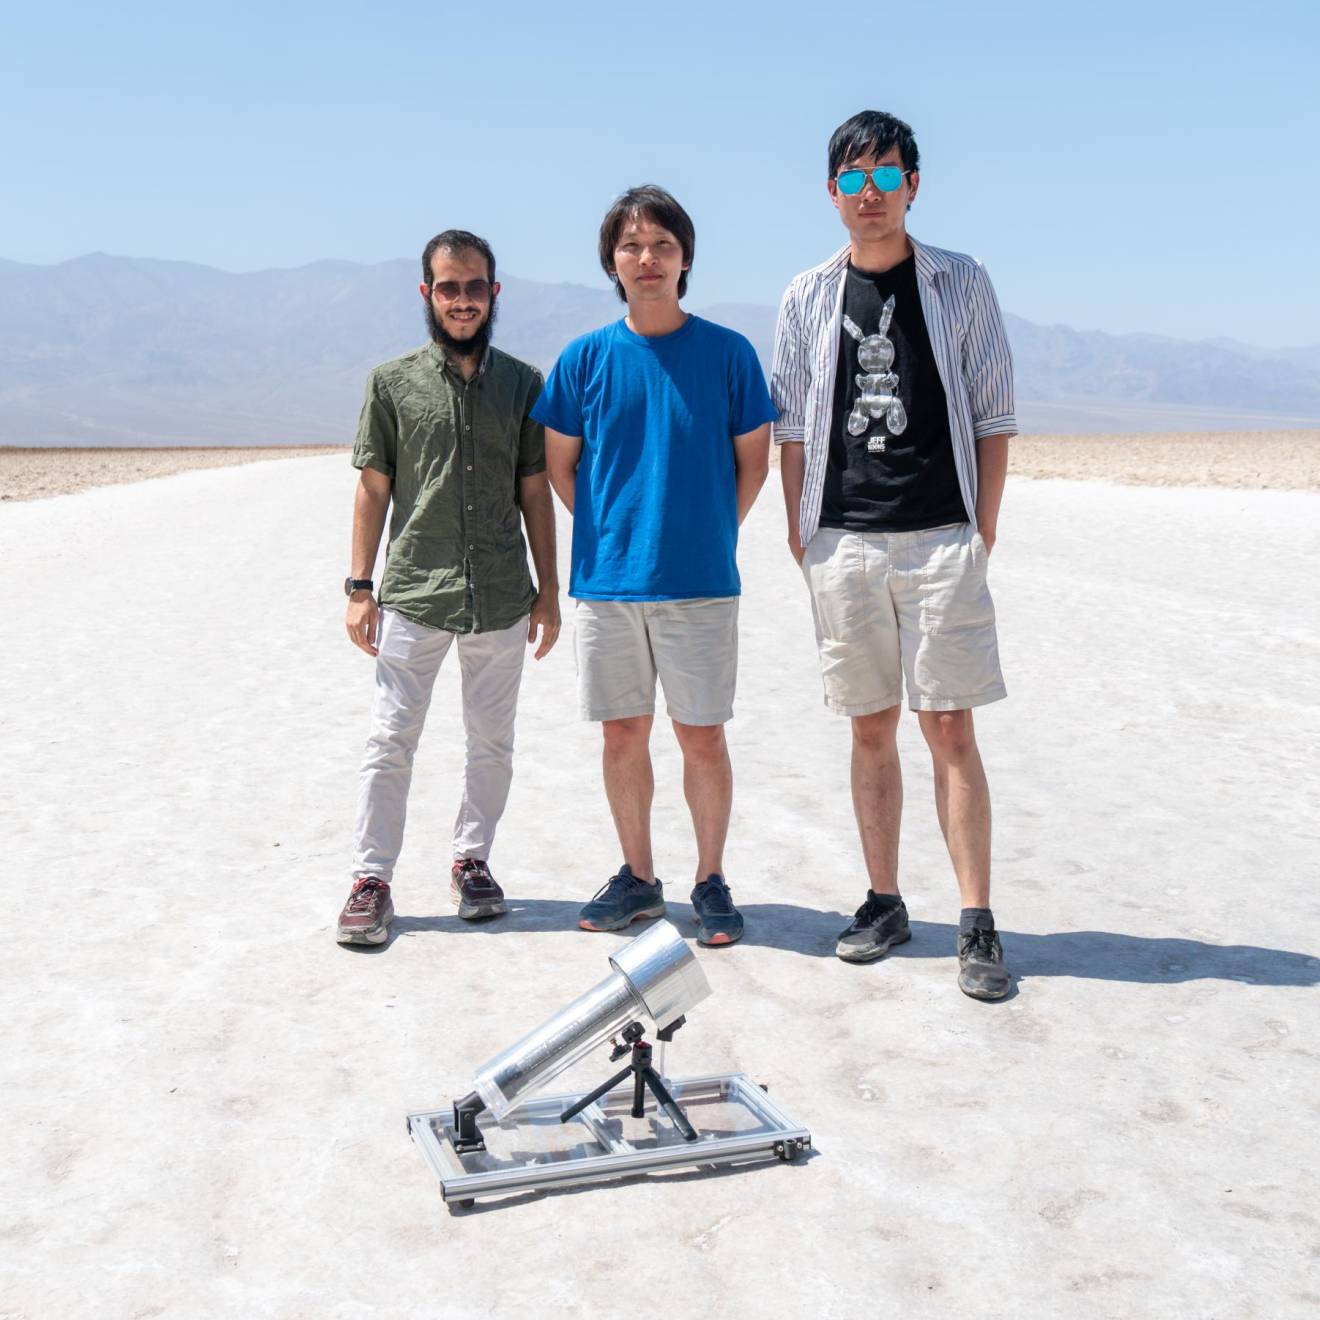 Three male students stand in white desert sands, behind a water harvester that looks like a microphone